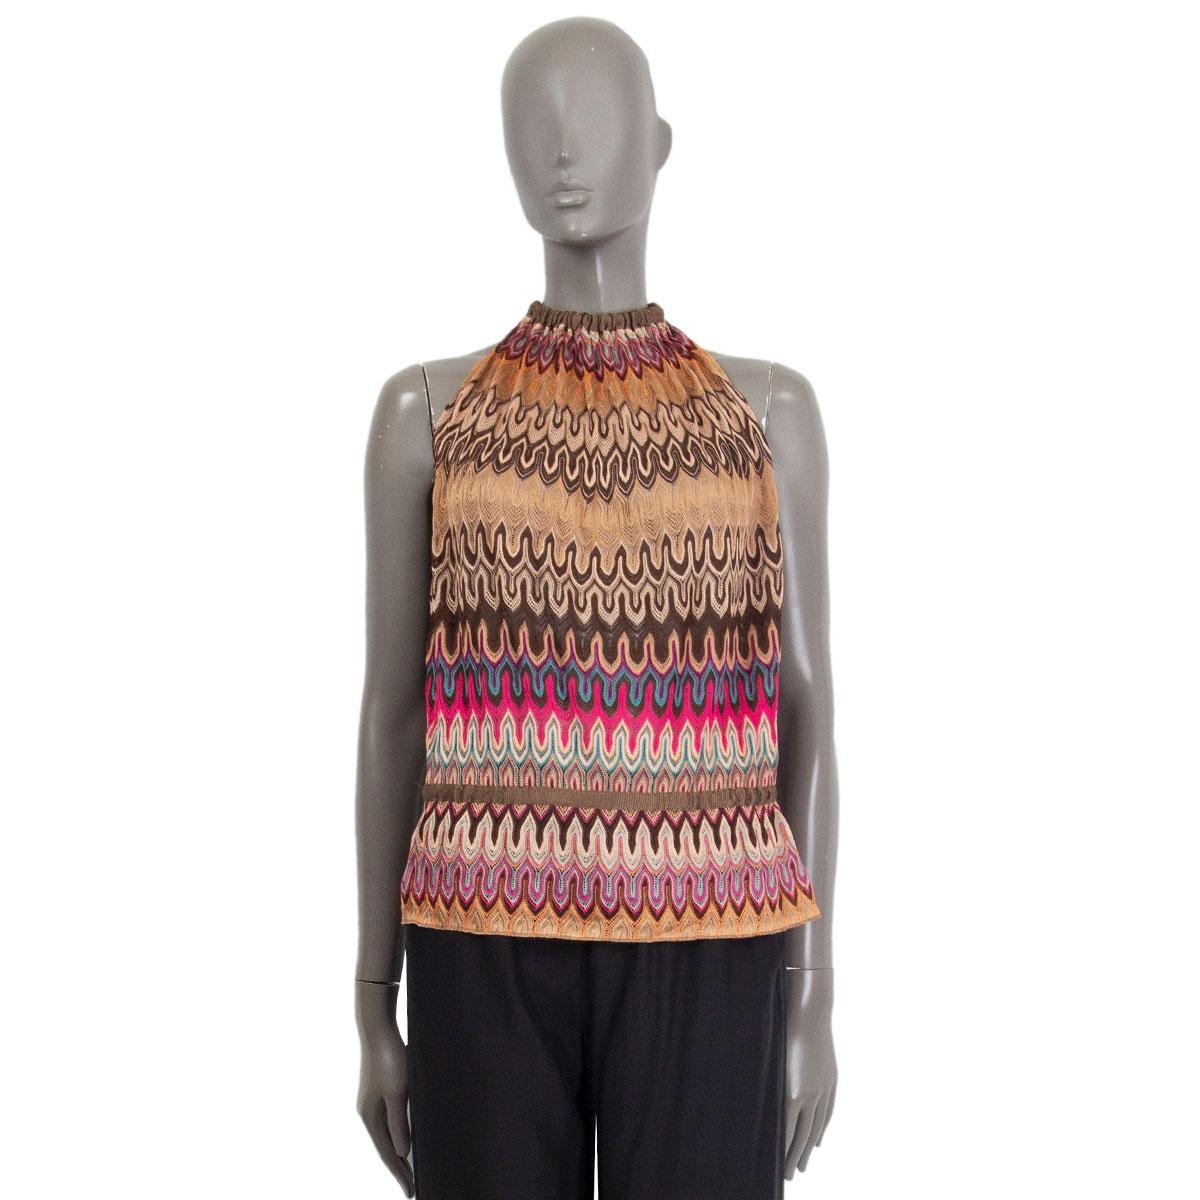 100% authentic Missoni halter-neck sheer knit top in pink, nude, brown, beige, petrol and turquoise viscose (100%). Ties around the neck and on the back. Unlined. Has a elastic drawstring around the waist. Has been worn and is in excellent